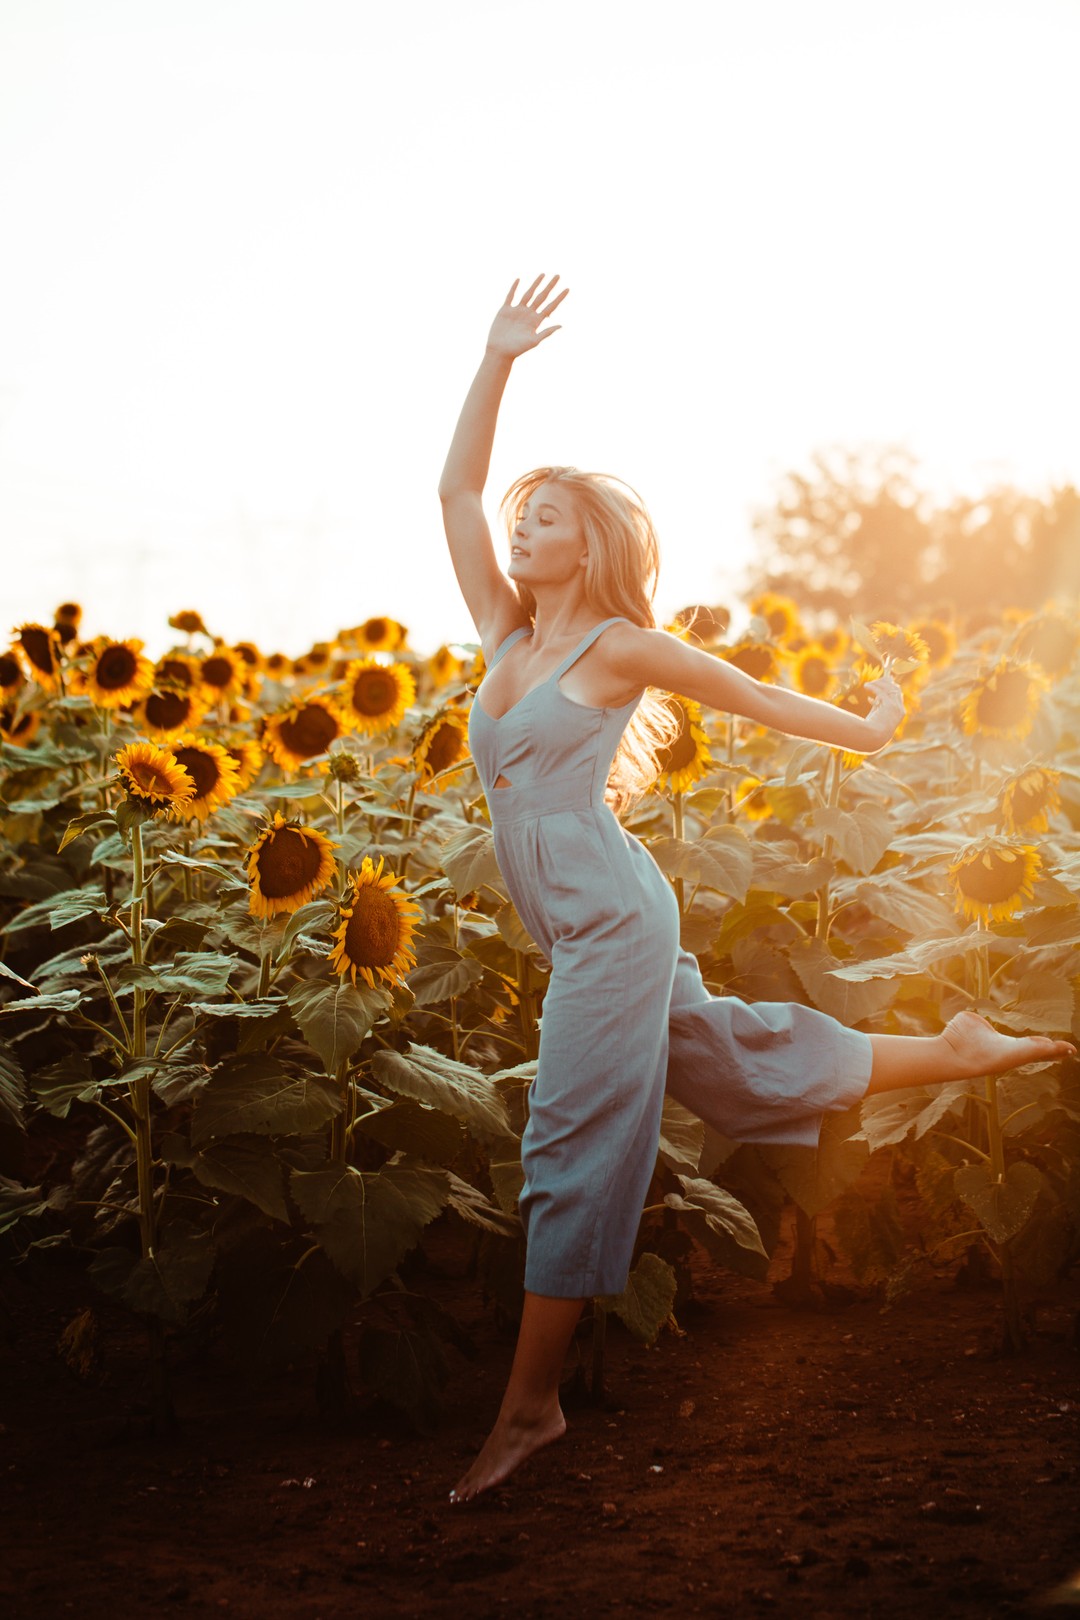 DANCING IN THE FIELD OF SUNFLOWERS